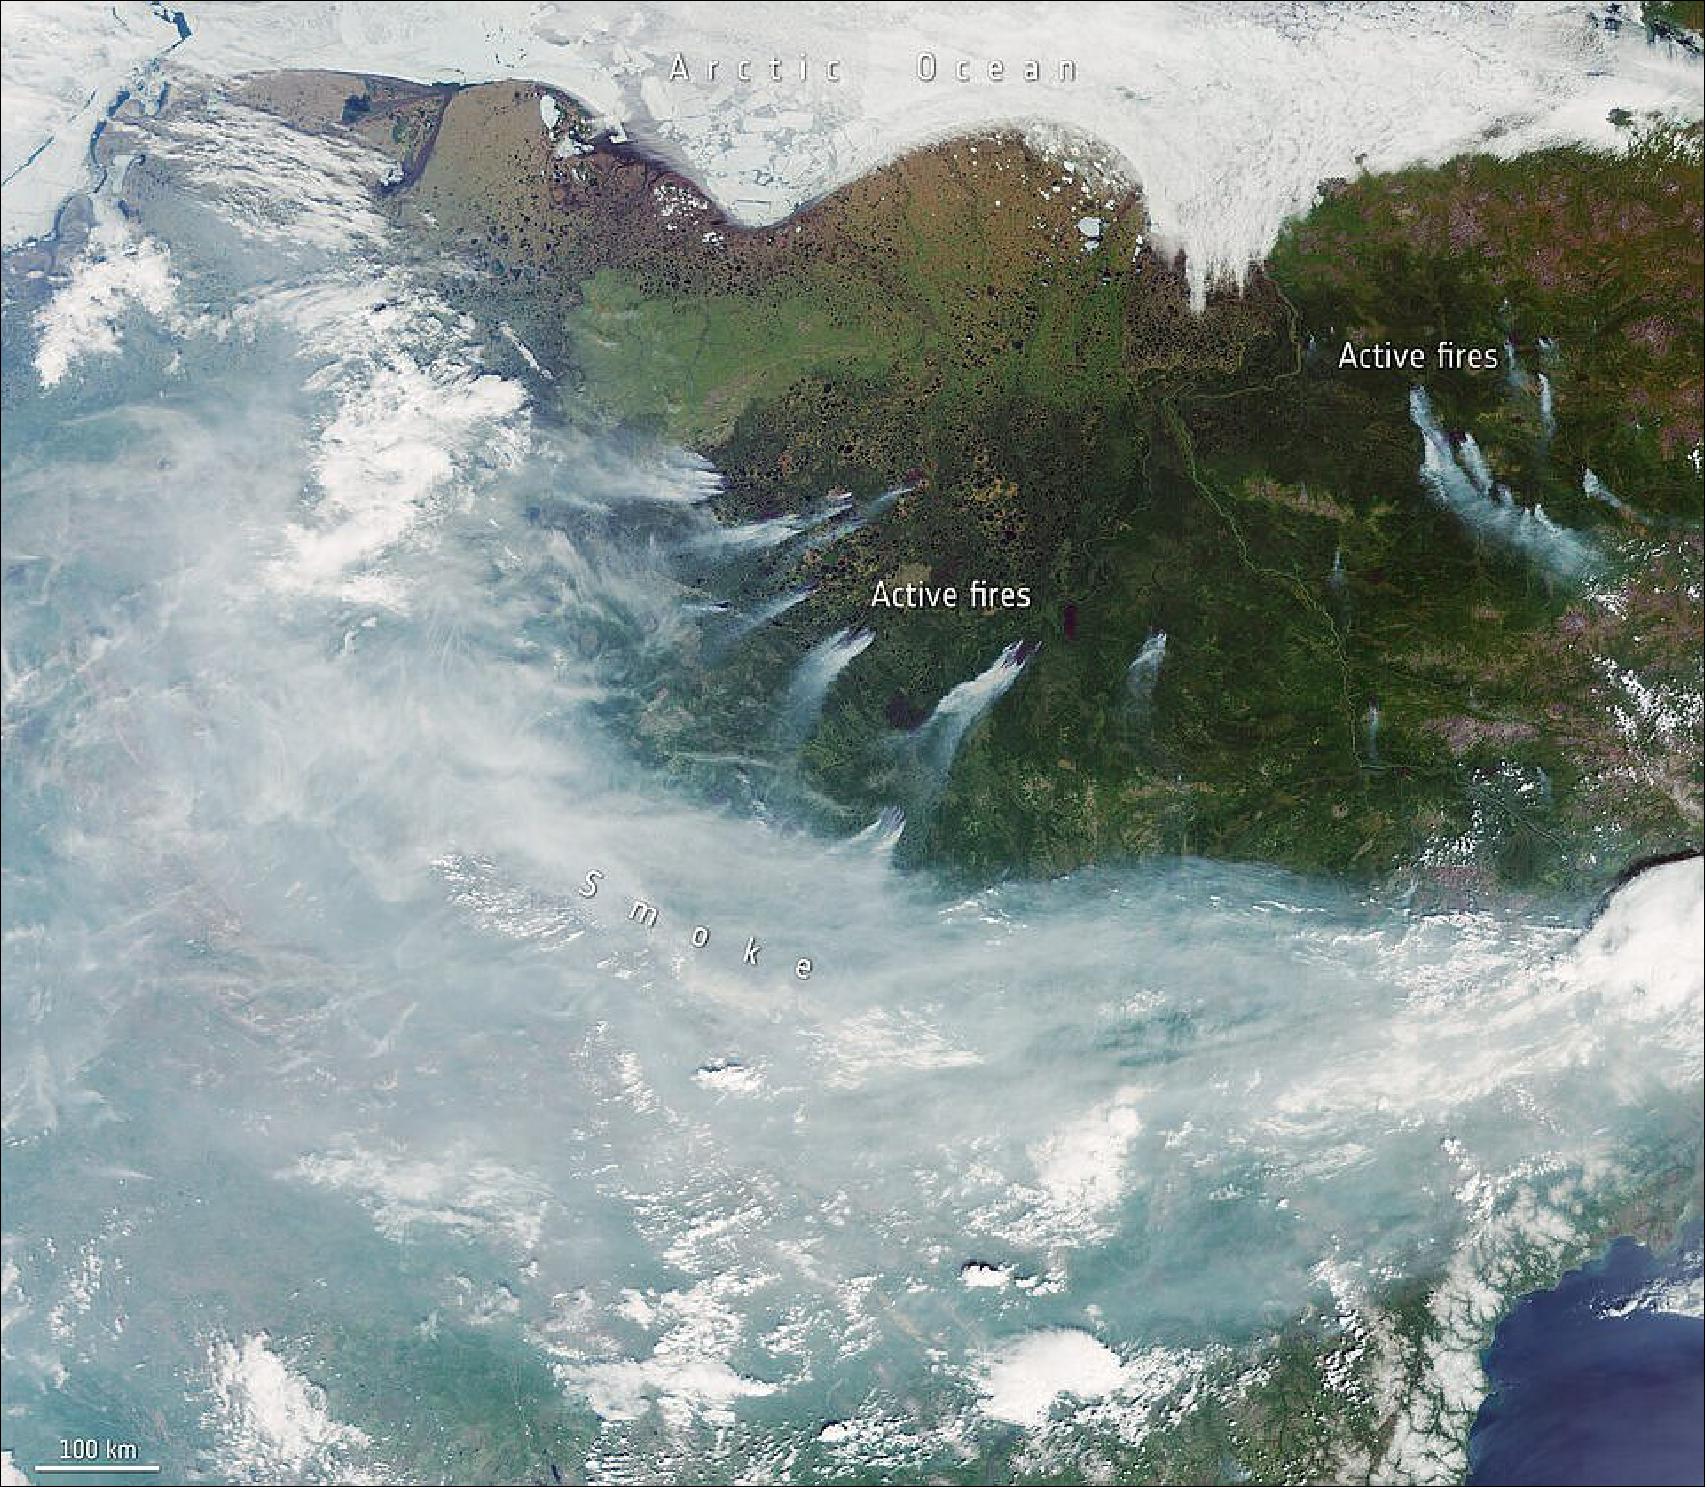 Figure 50: This image of Siberian fires was captured on 23 June 2020 by the OLCI instrument on board the Copernicus Sentinel-3 mission. Part of Sakha, Chukotka and the Magadan Oblast is pictured here. Sea-ice can be seen to the north while smoke dominates the bottom part of the image with a number of active fires visible in the center (image credit: ESA, the image contains modified Copernicus Sentinel data (2020), processed by ESA, CC BY-SA 3.0 IGO)